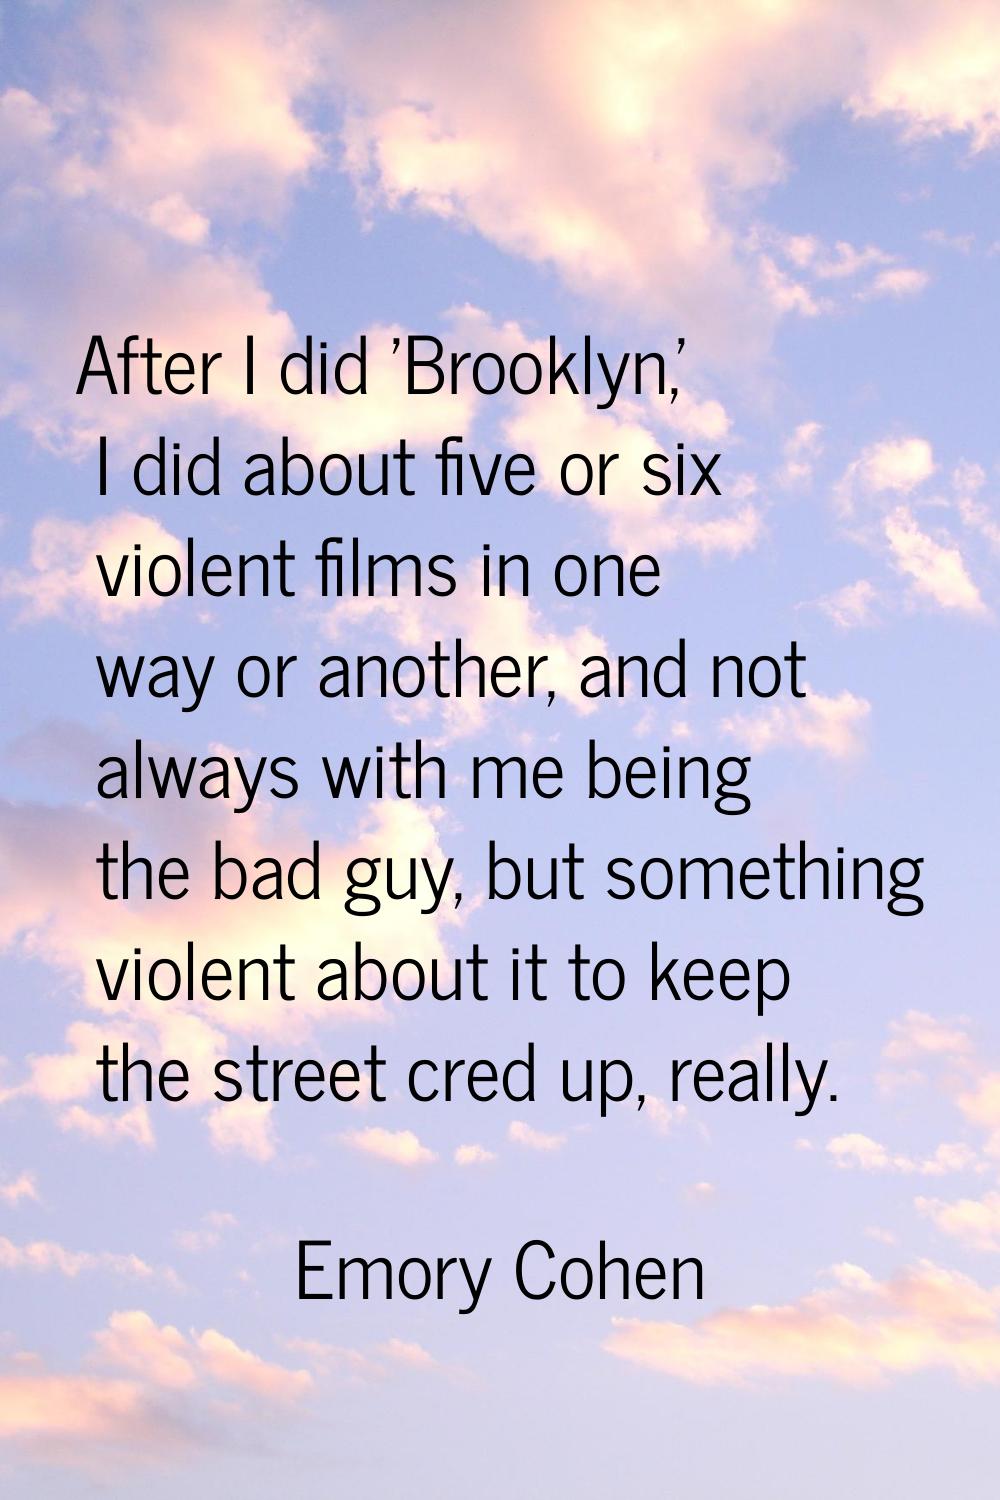 After I did 'Brooklyn,' I did about five or six violent films in one way or another, and not always